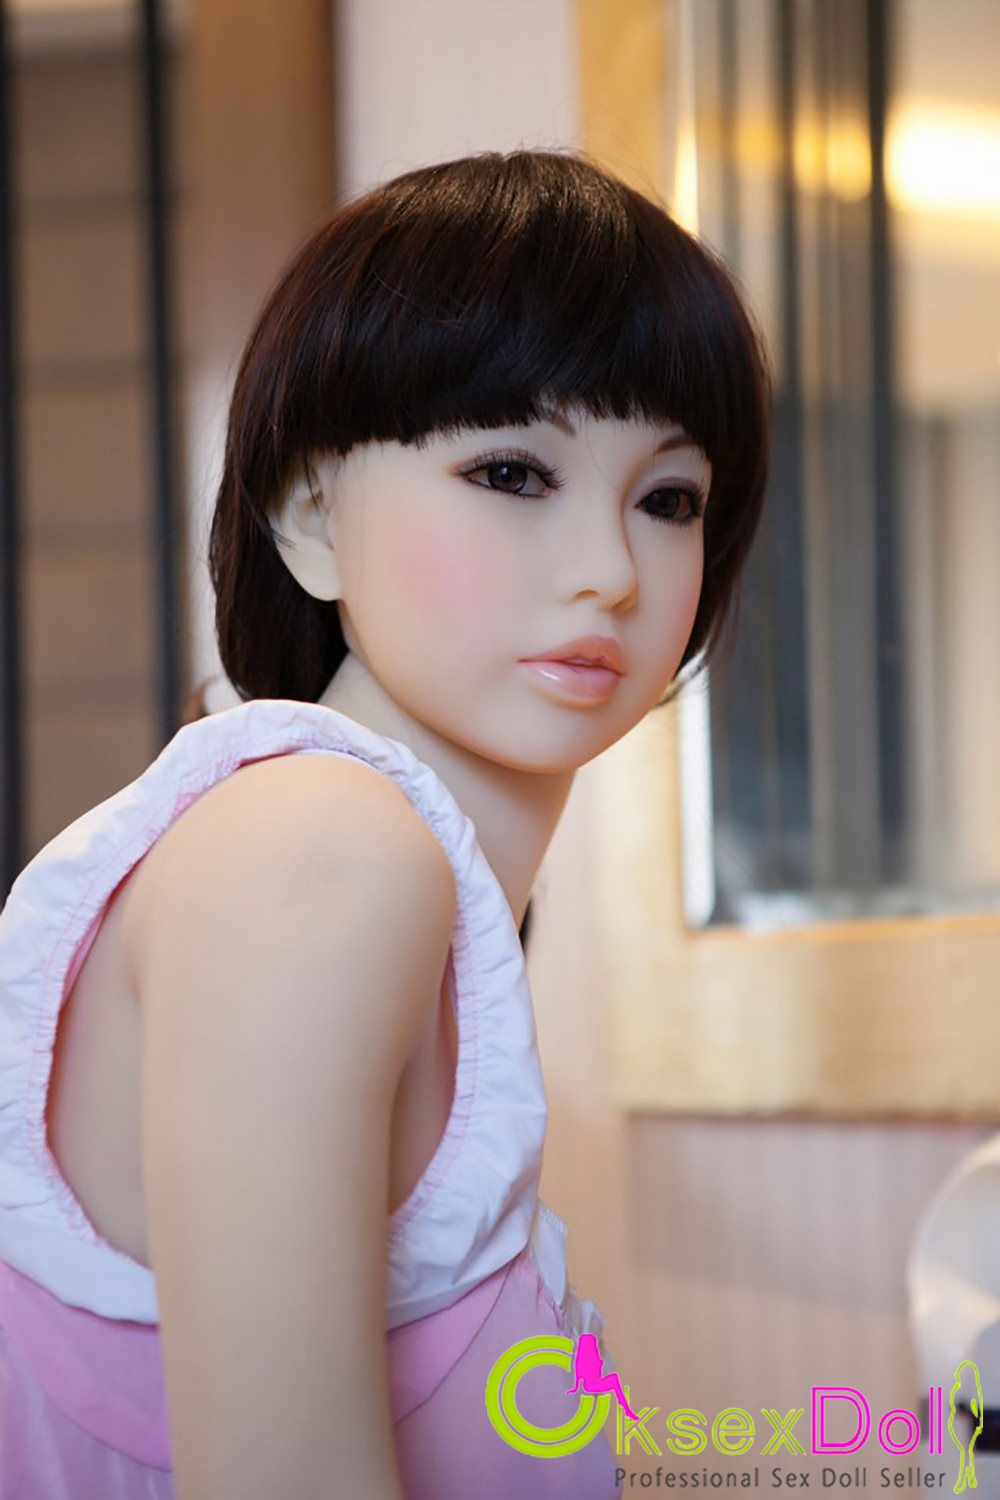 Flat Chested Sex Doll images